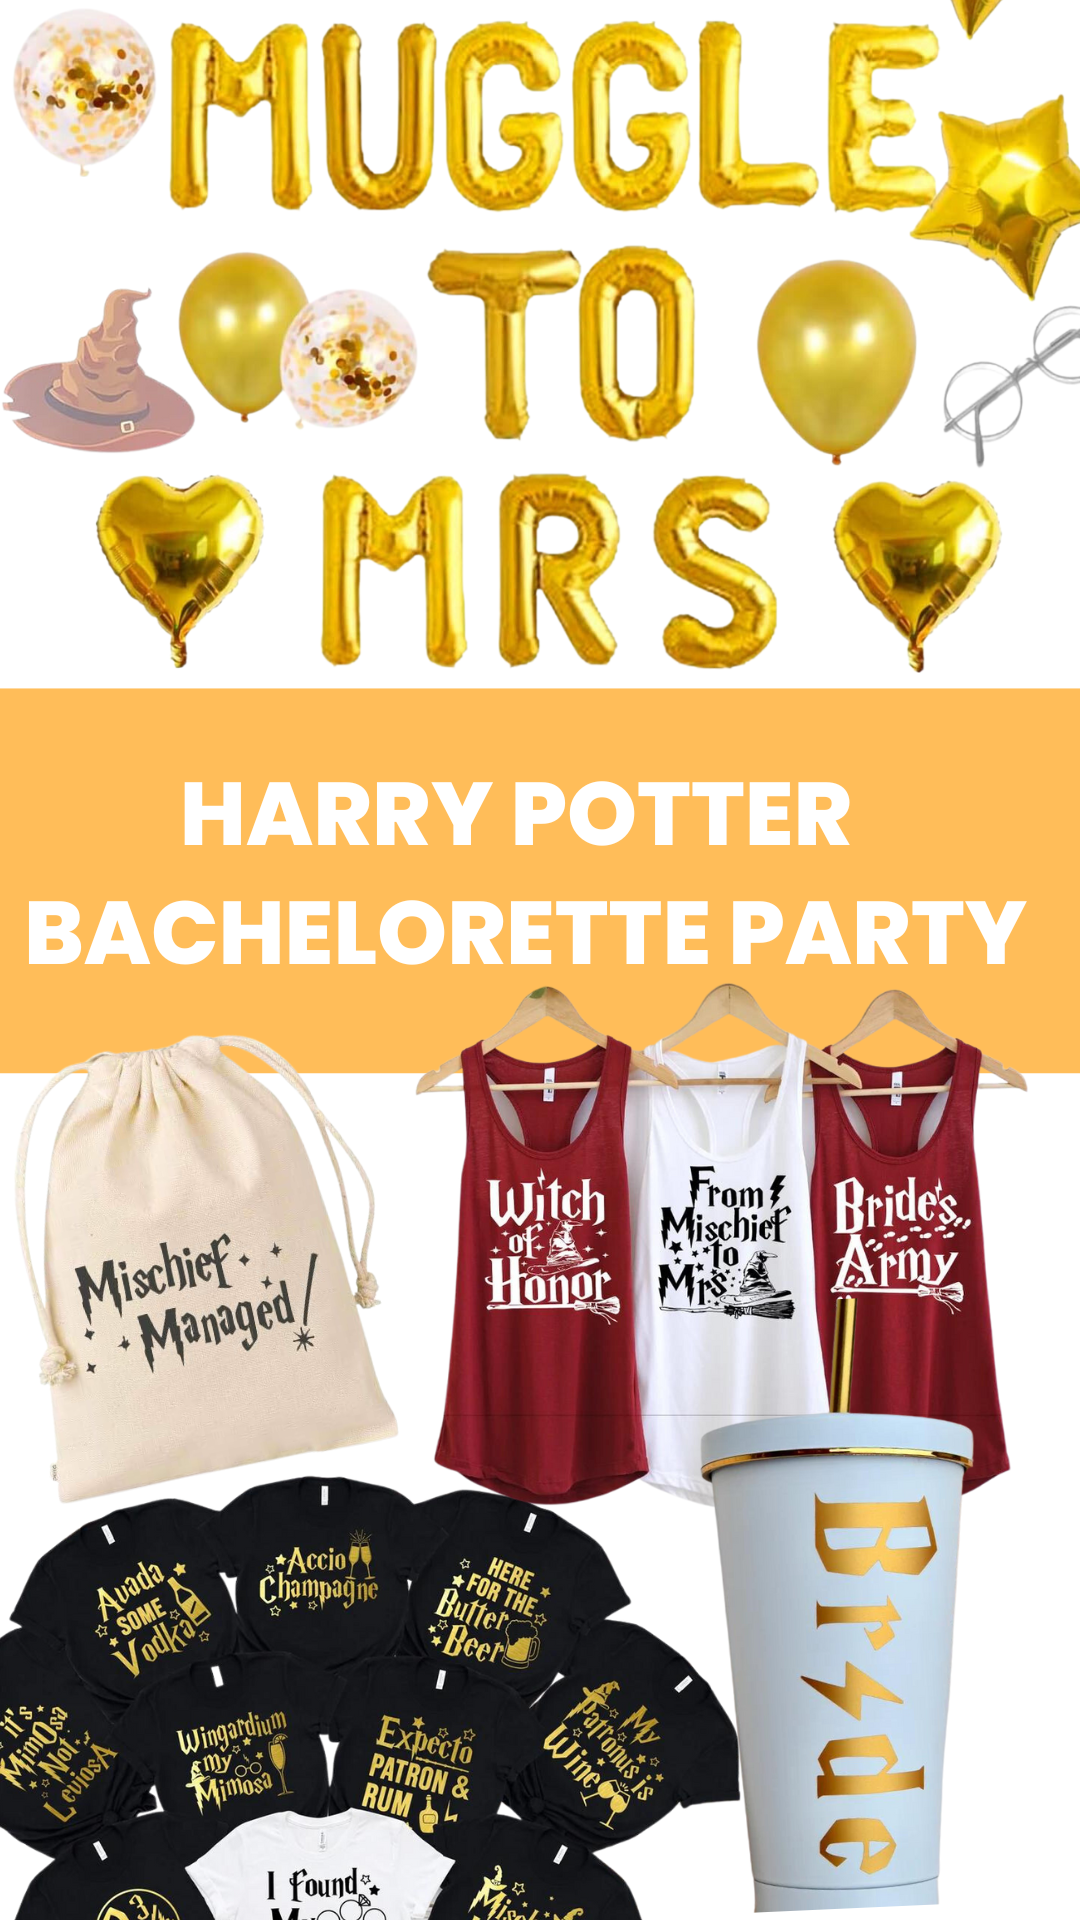 How To Plan a Harry Potter Themed Party